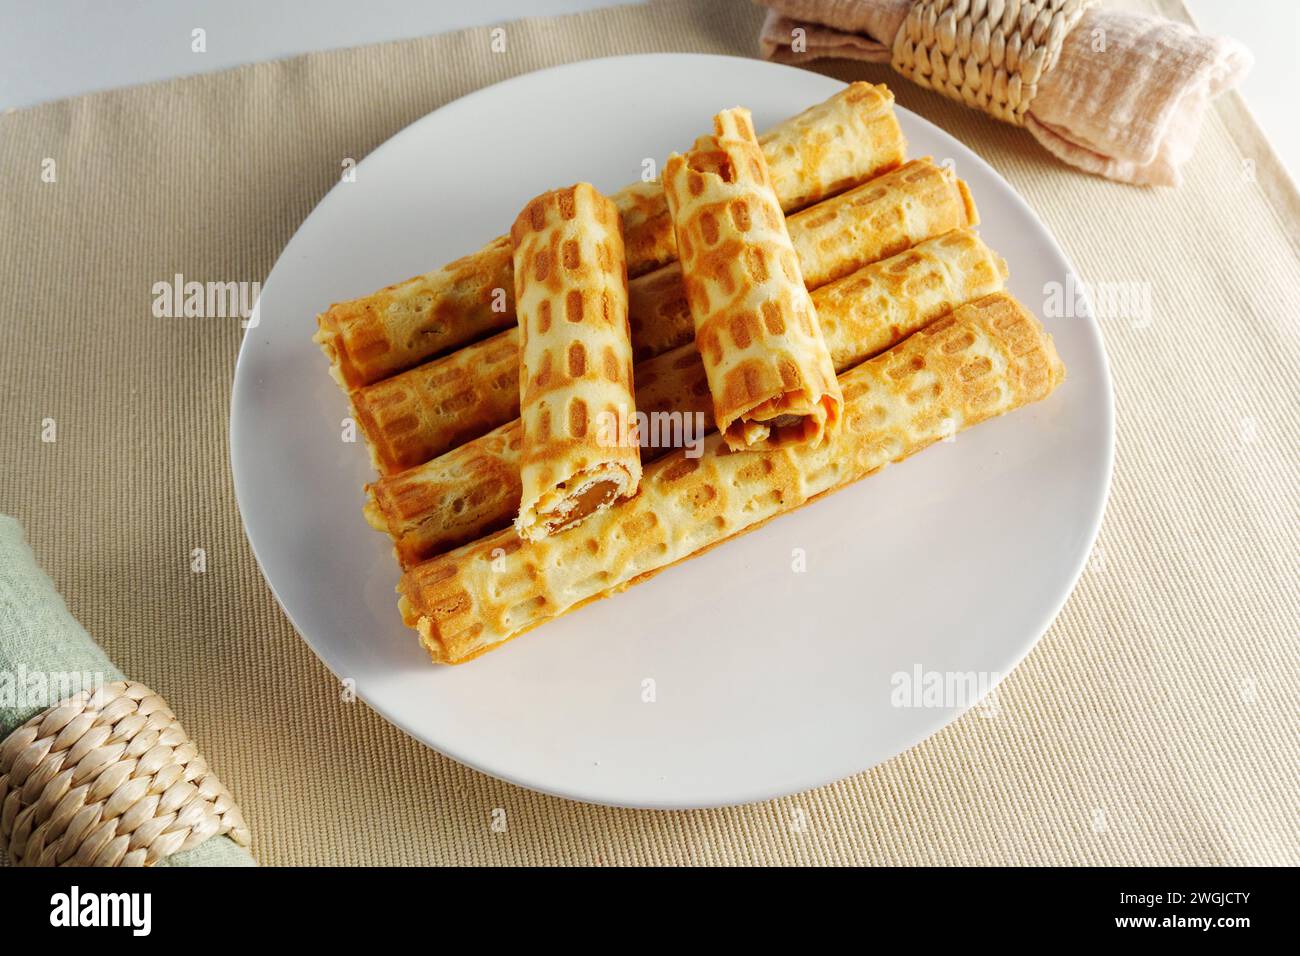 Ethereal Morning Delight: A Gourmet Stack of Golden Waffles on a Crisp White Plate Stock Photo